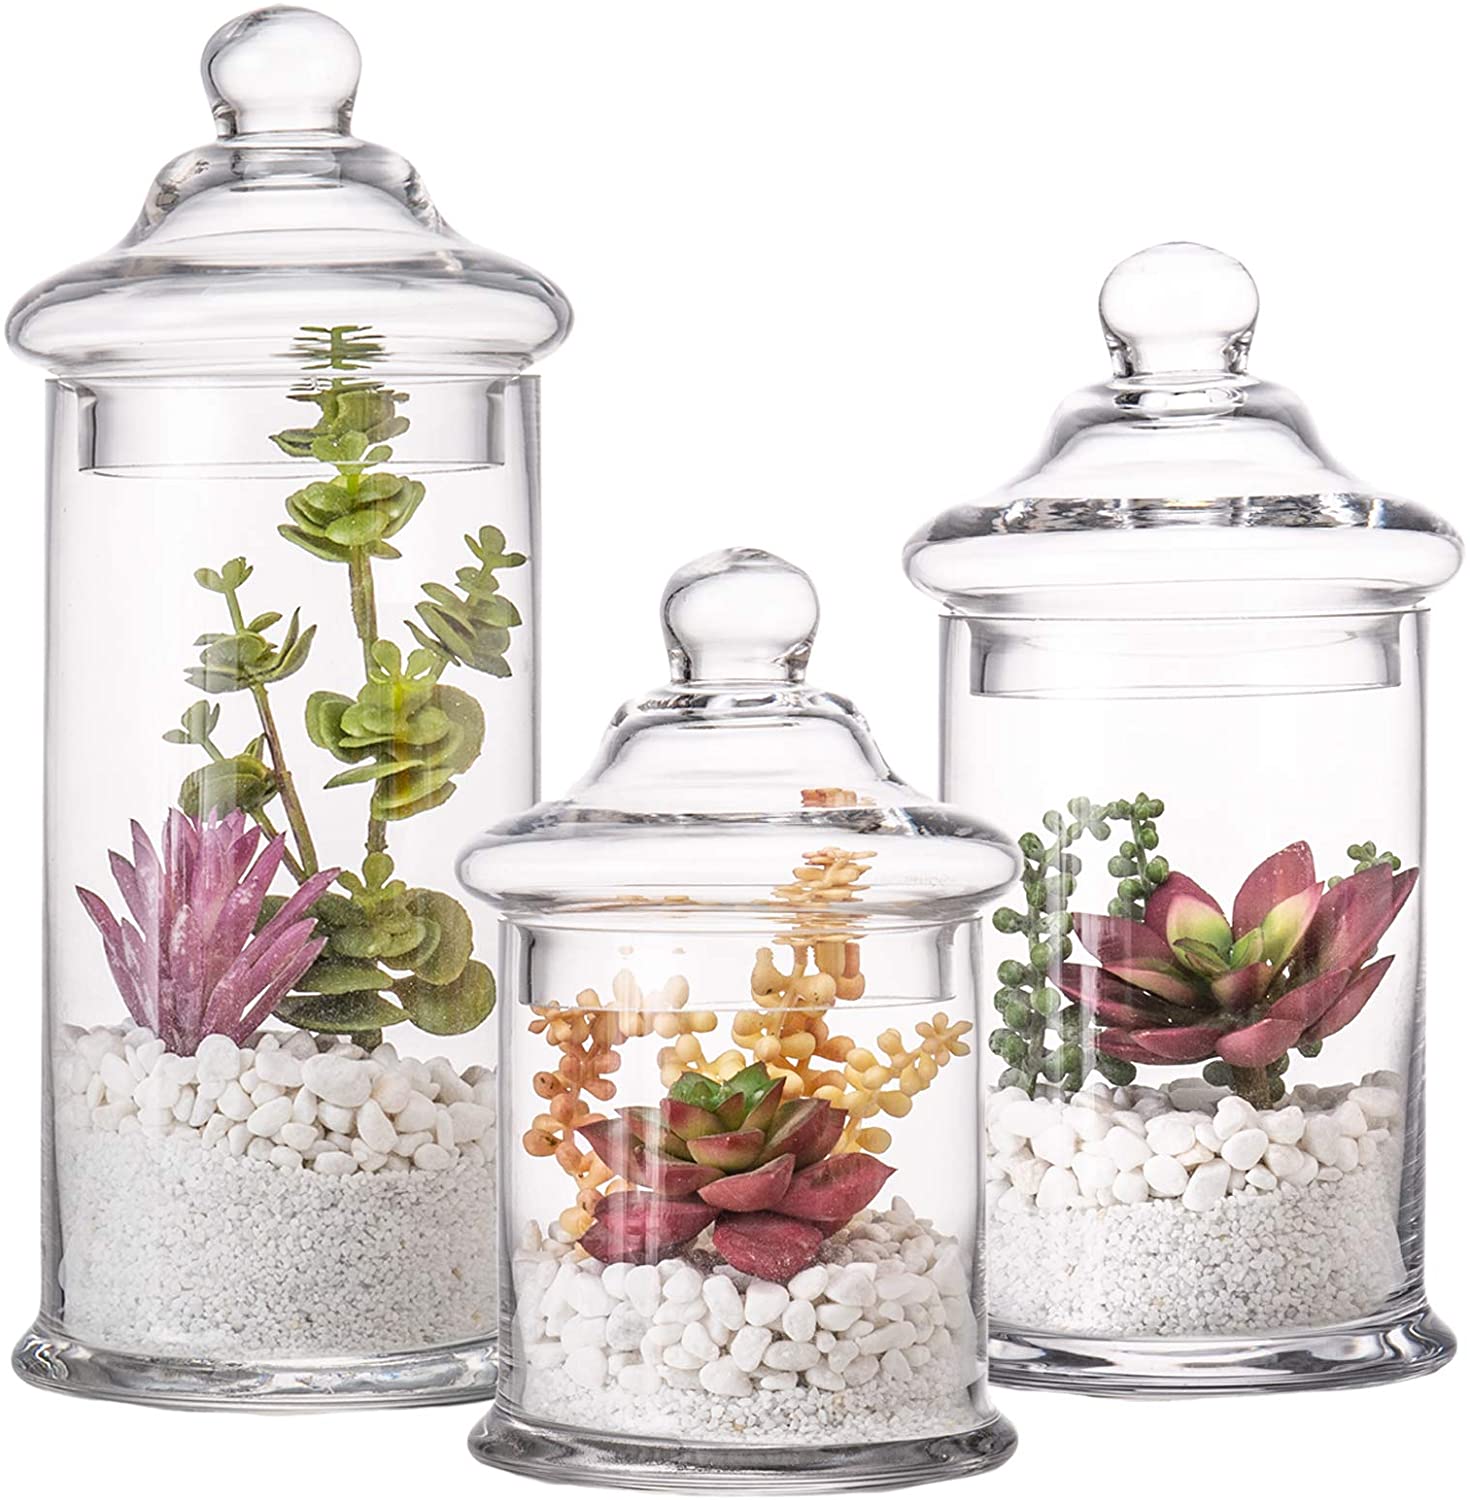 Glass Apothecary Jars with Lids, Decorative Display Canisters